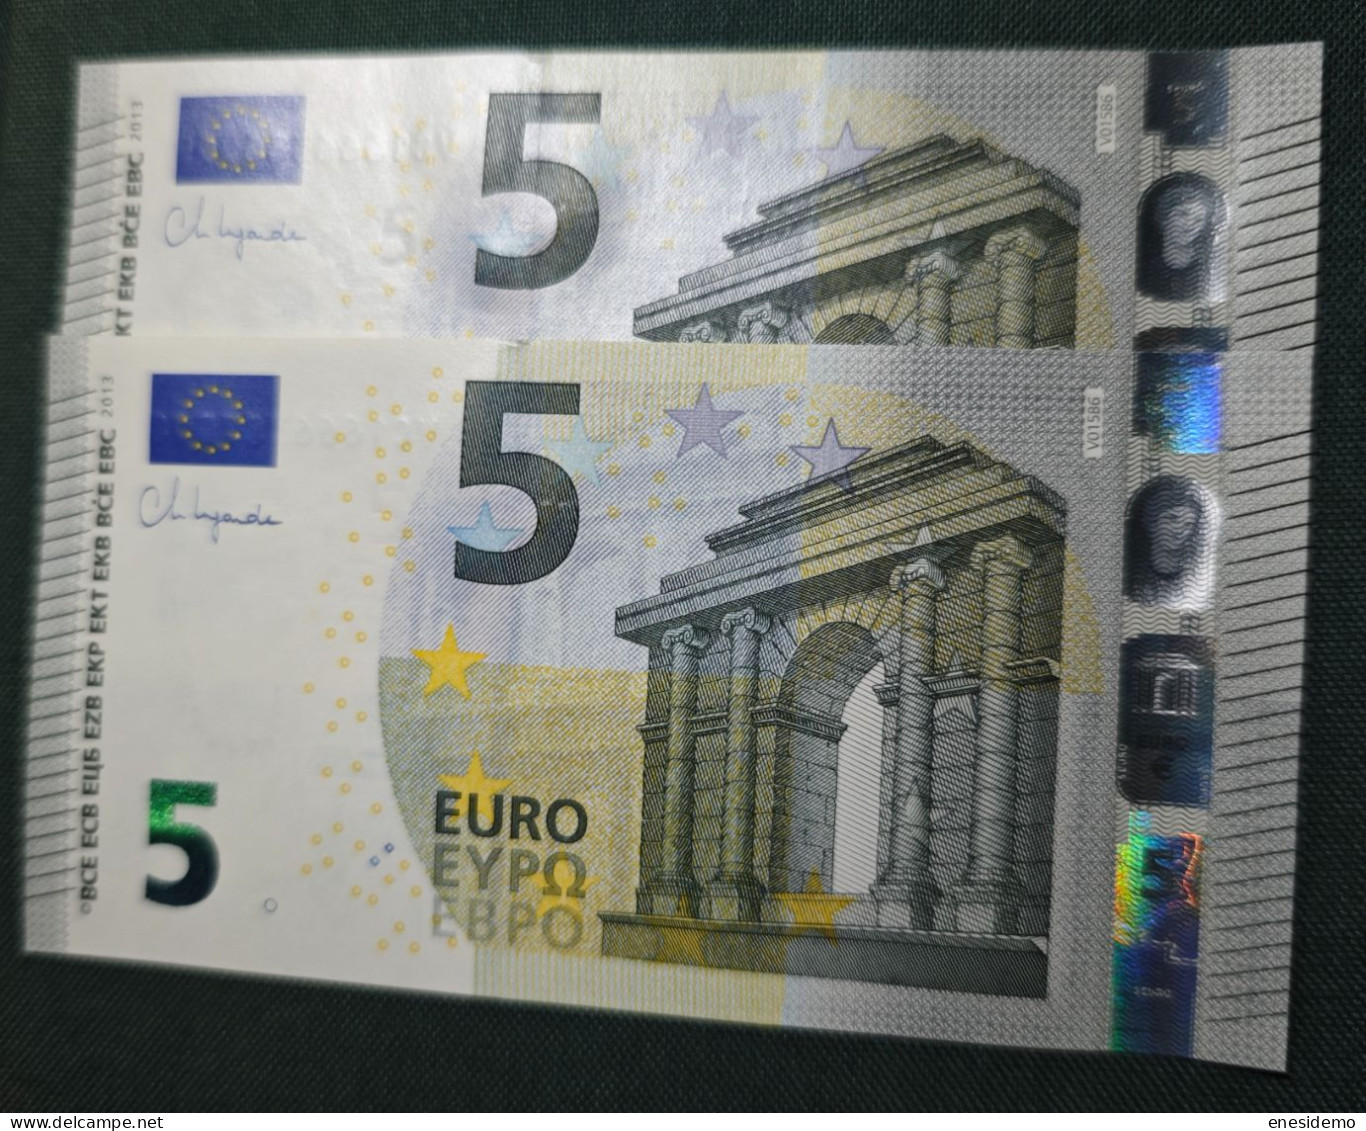 5 EURO SPAIN 2013 LAGARDE V015B6 VC CORRELATIVE COUPLE HUNDRED CHANGE NICE NUMBER SC FDS UNC.  PERFECT - 5 Euro